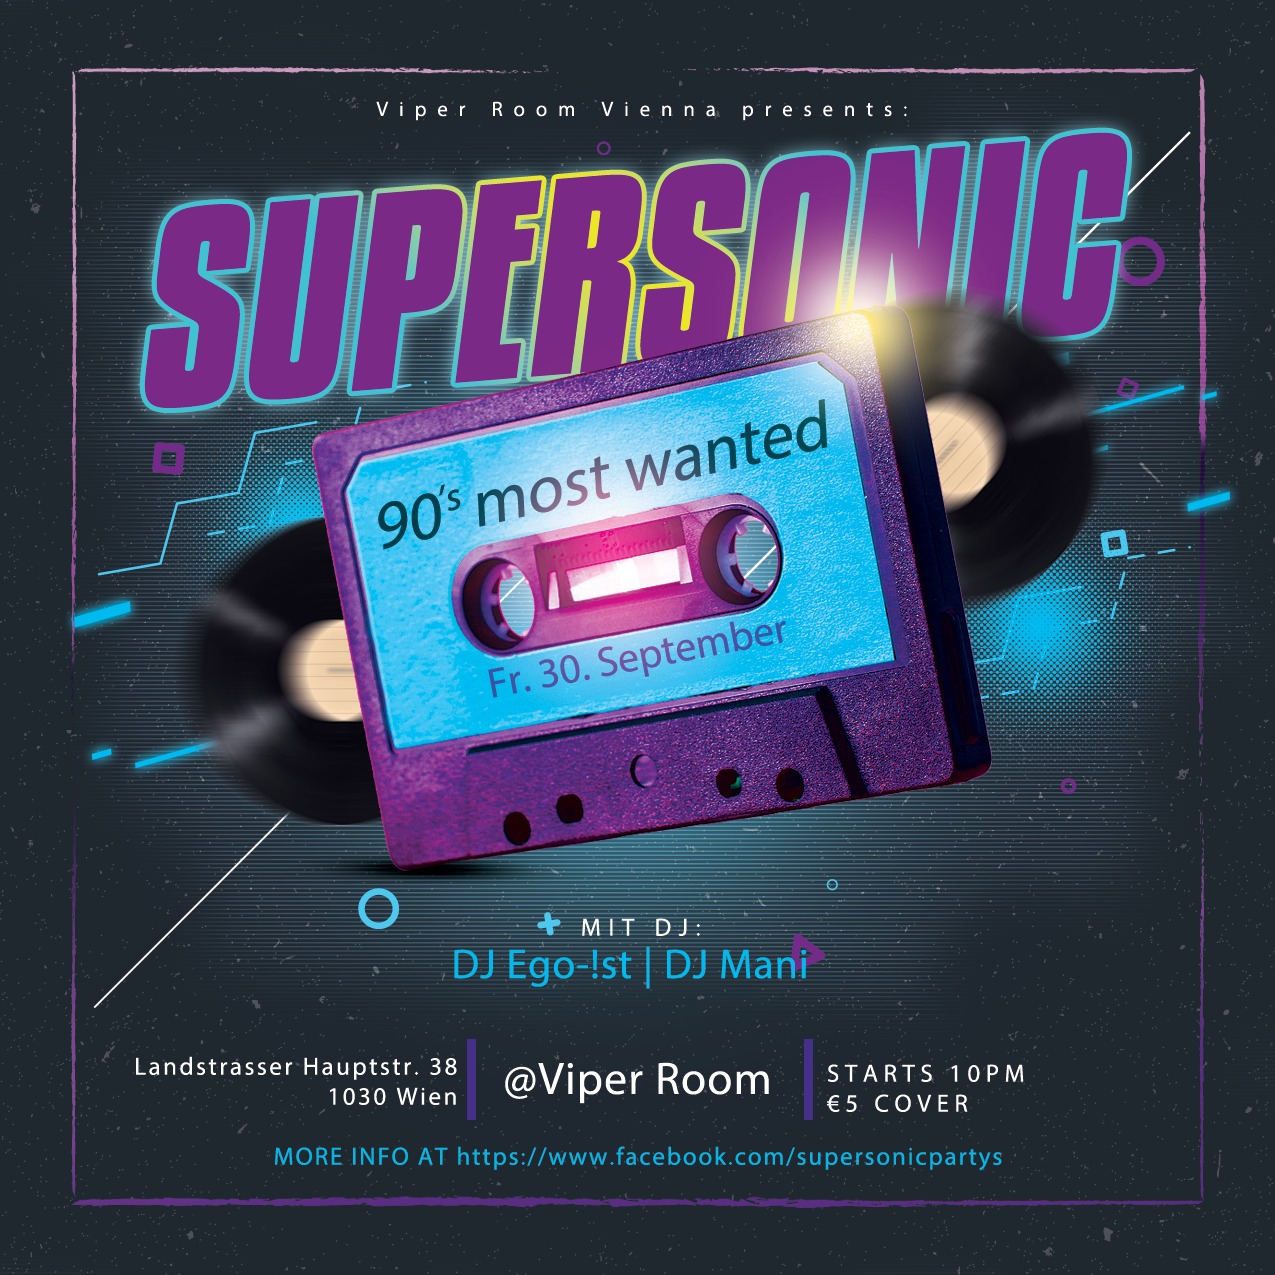 Supersonic - 90's MOST Wanted am 30. September 2022 @ Viper Room.